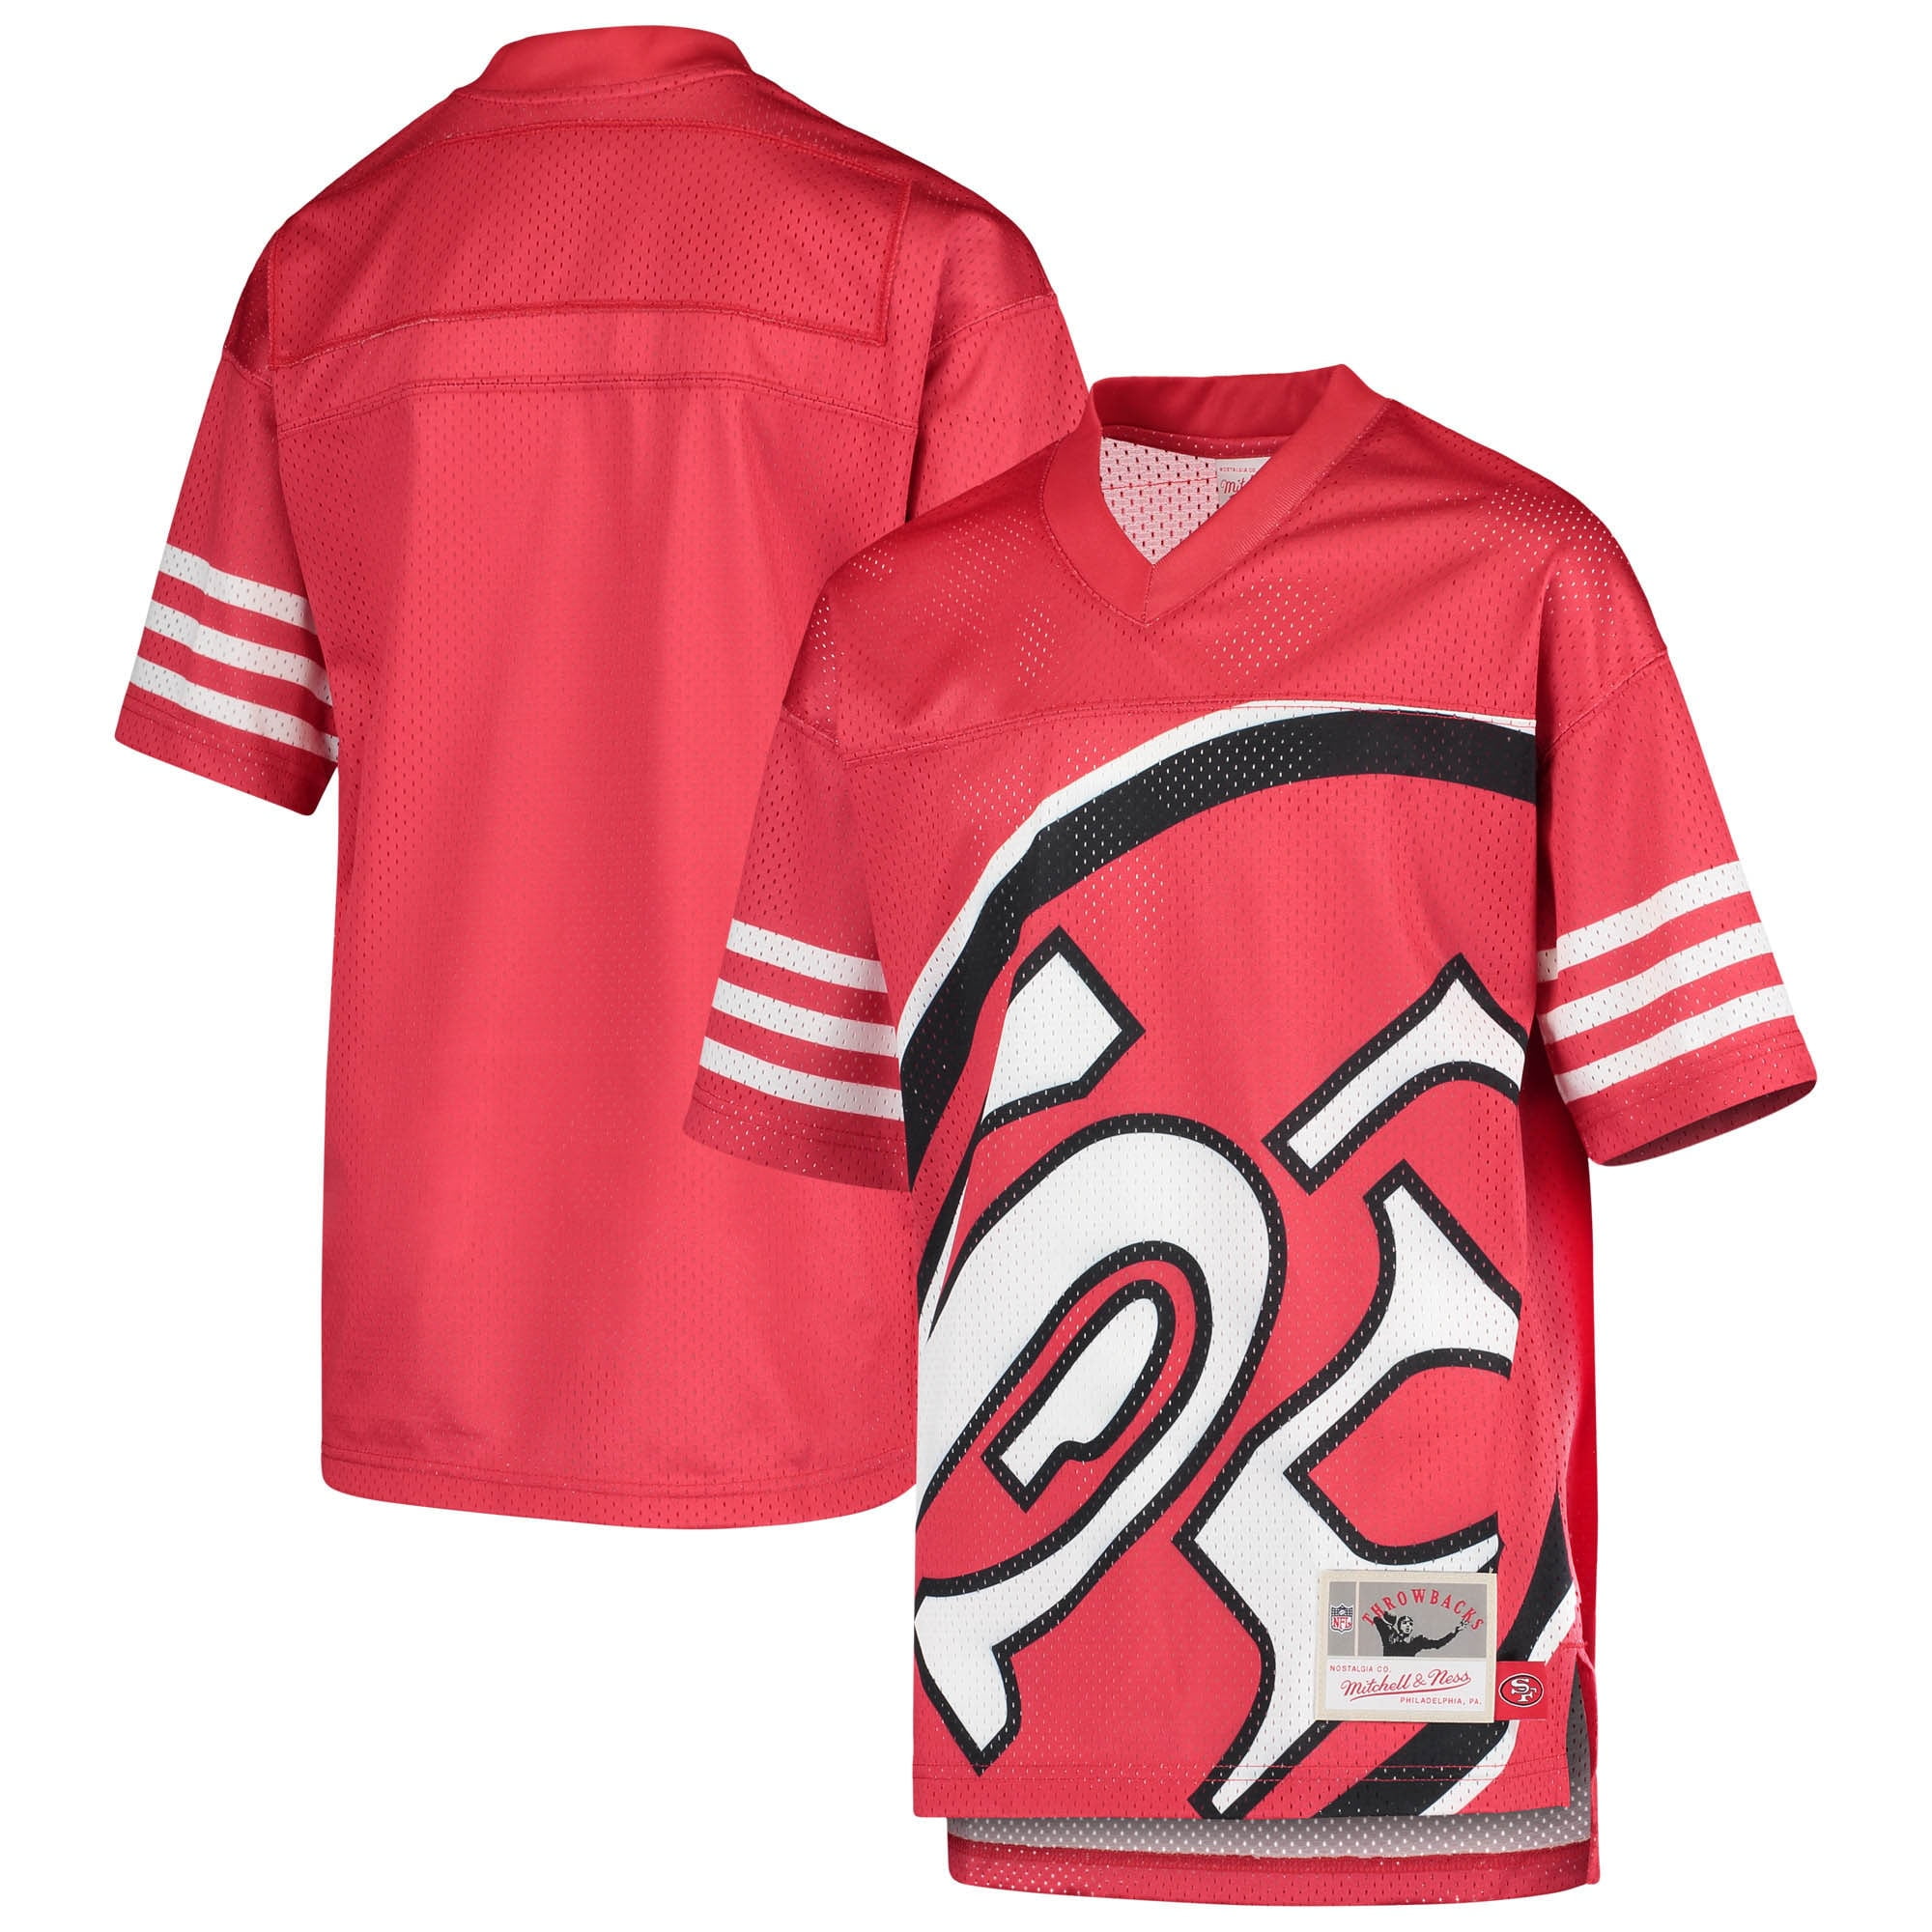 49ers mitchell and ness jersey